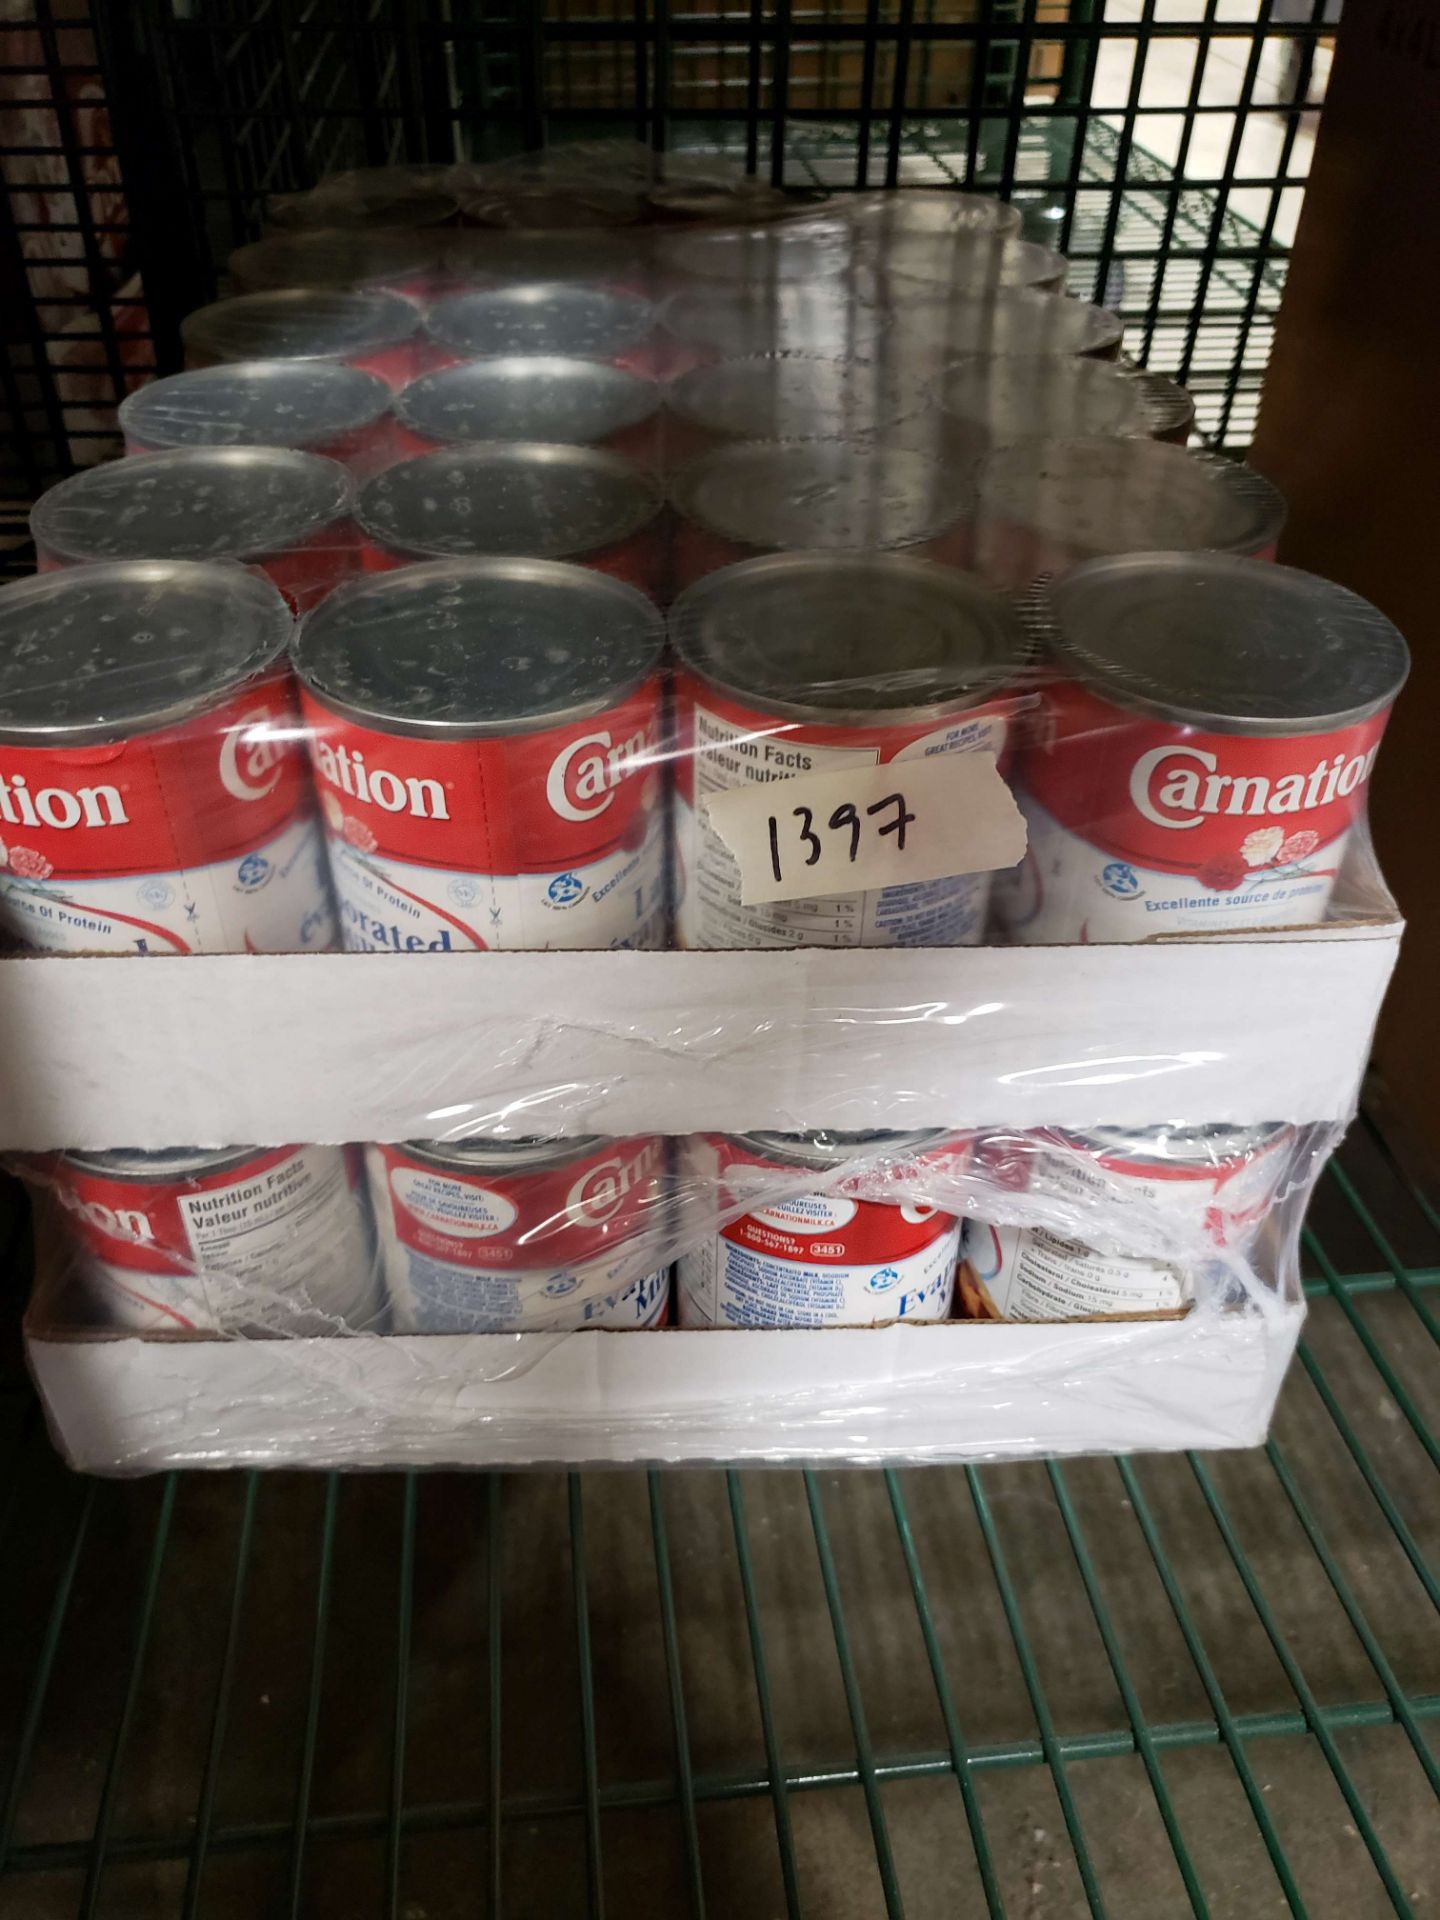 Carnation Evaporated Milk - 48 Cans